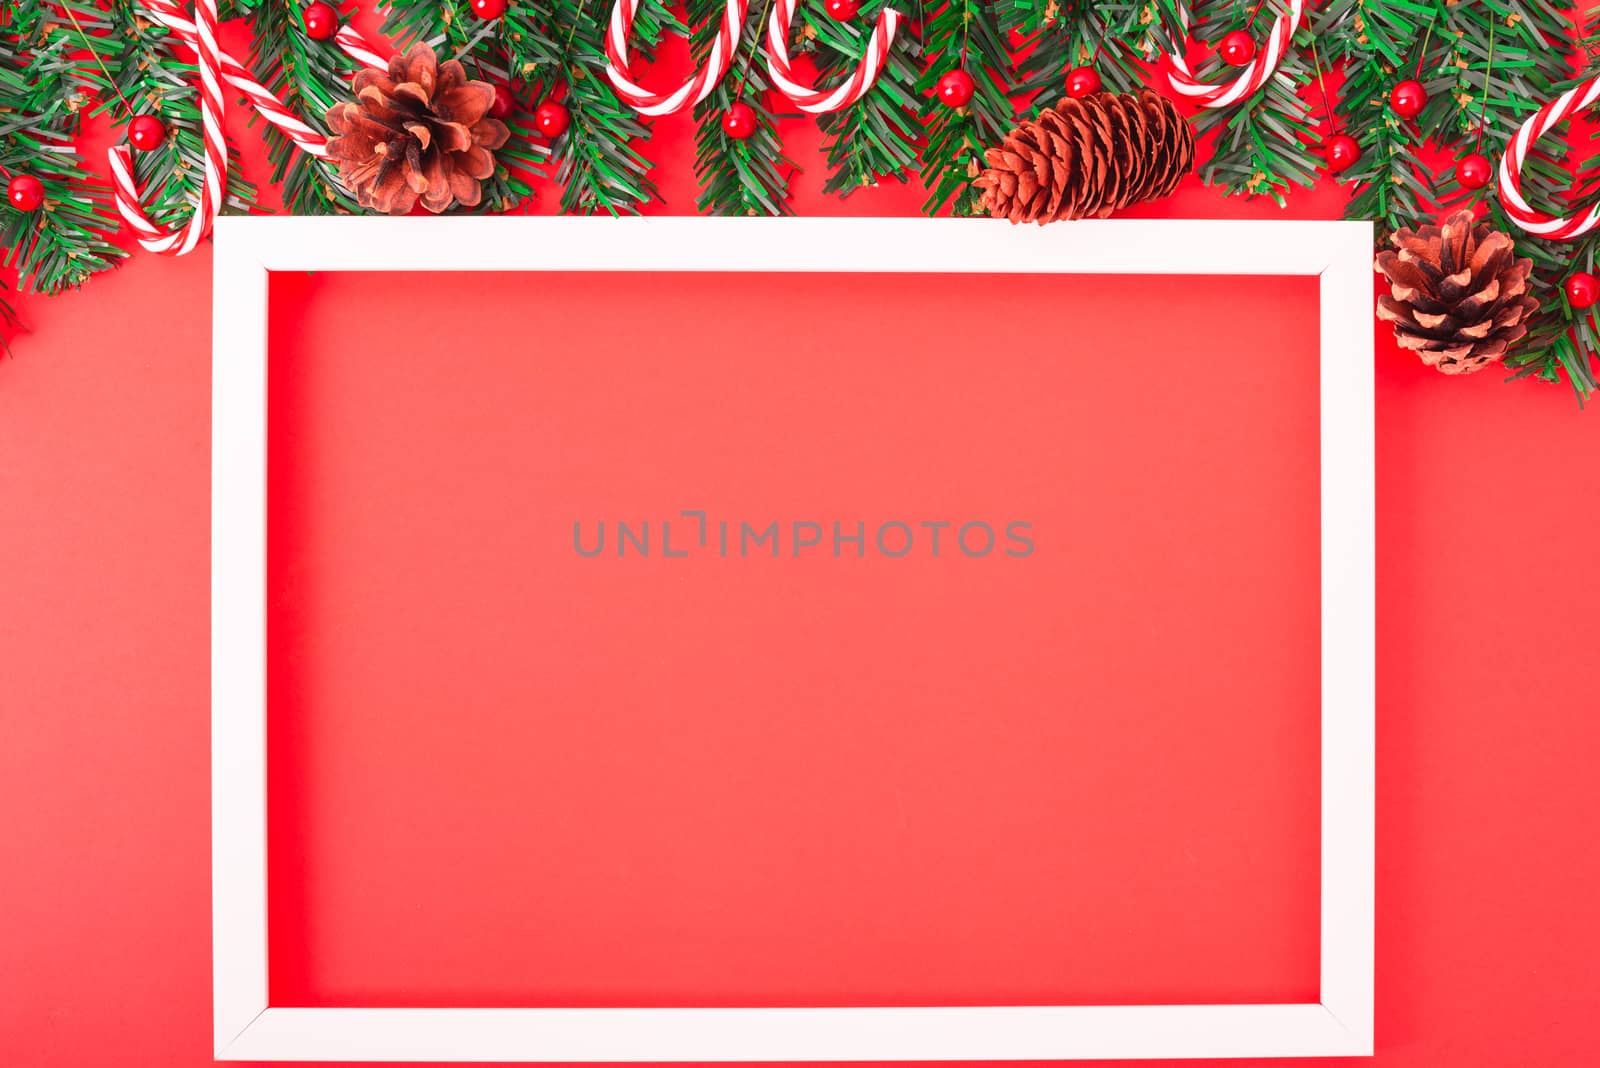 Happy New Year and Christmas day, top view flat lay composition decoration tree fir and photo frame on red background with copy space for your text